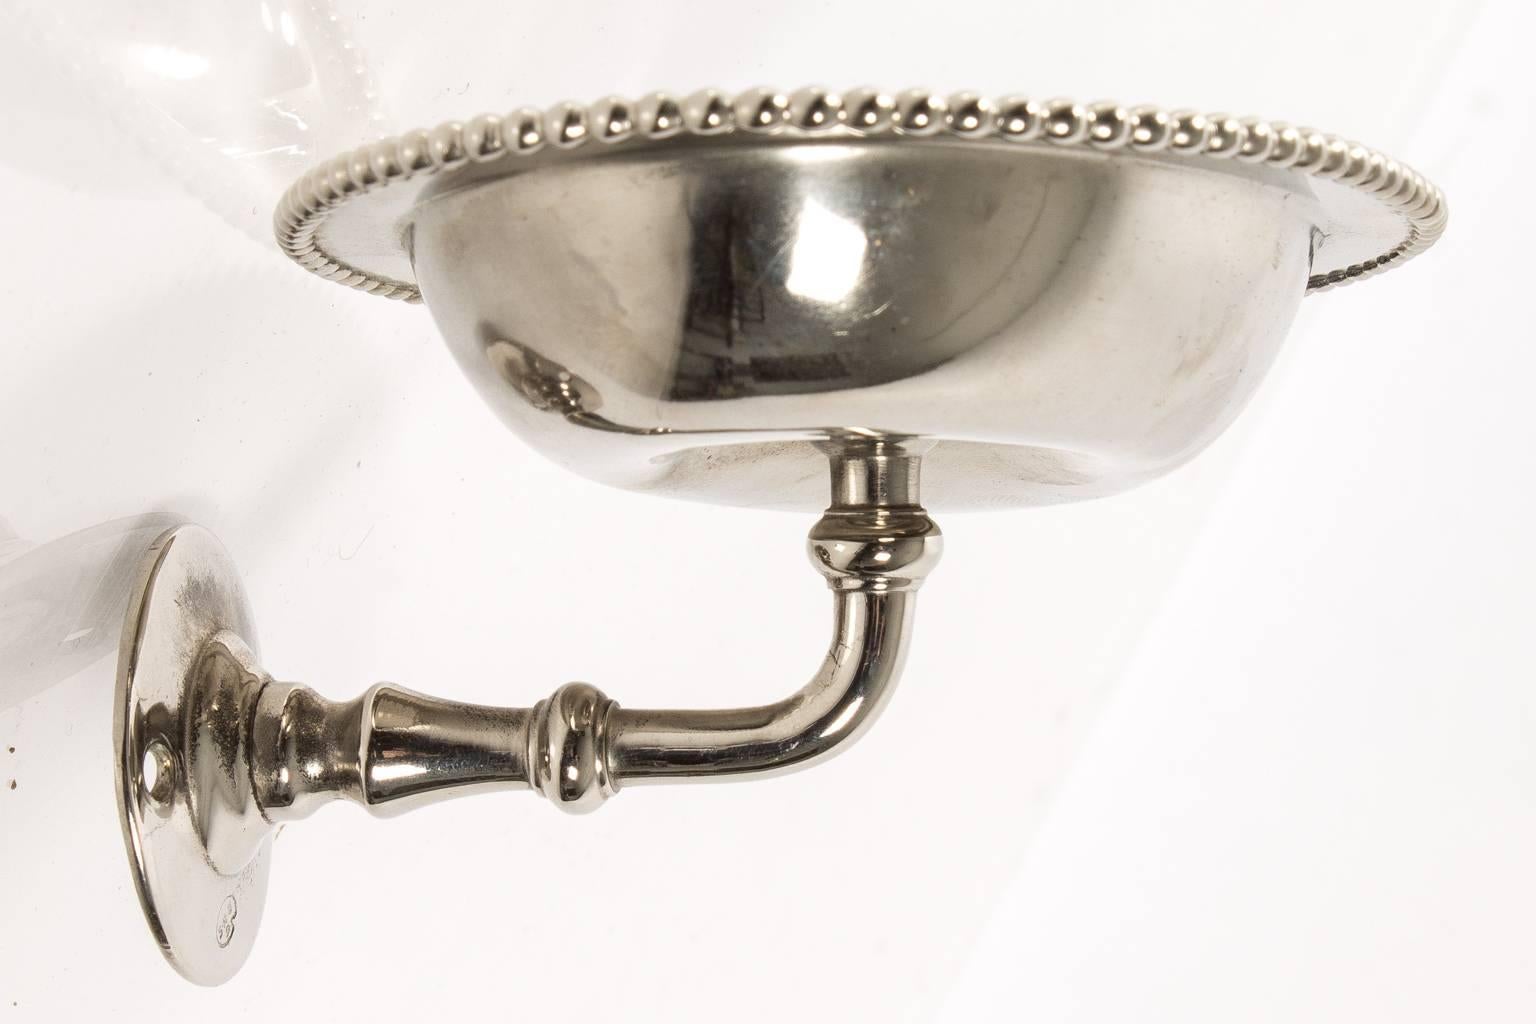 Beaded metal wall-mounted soap dish holder.